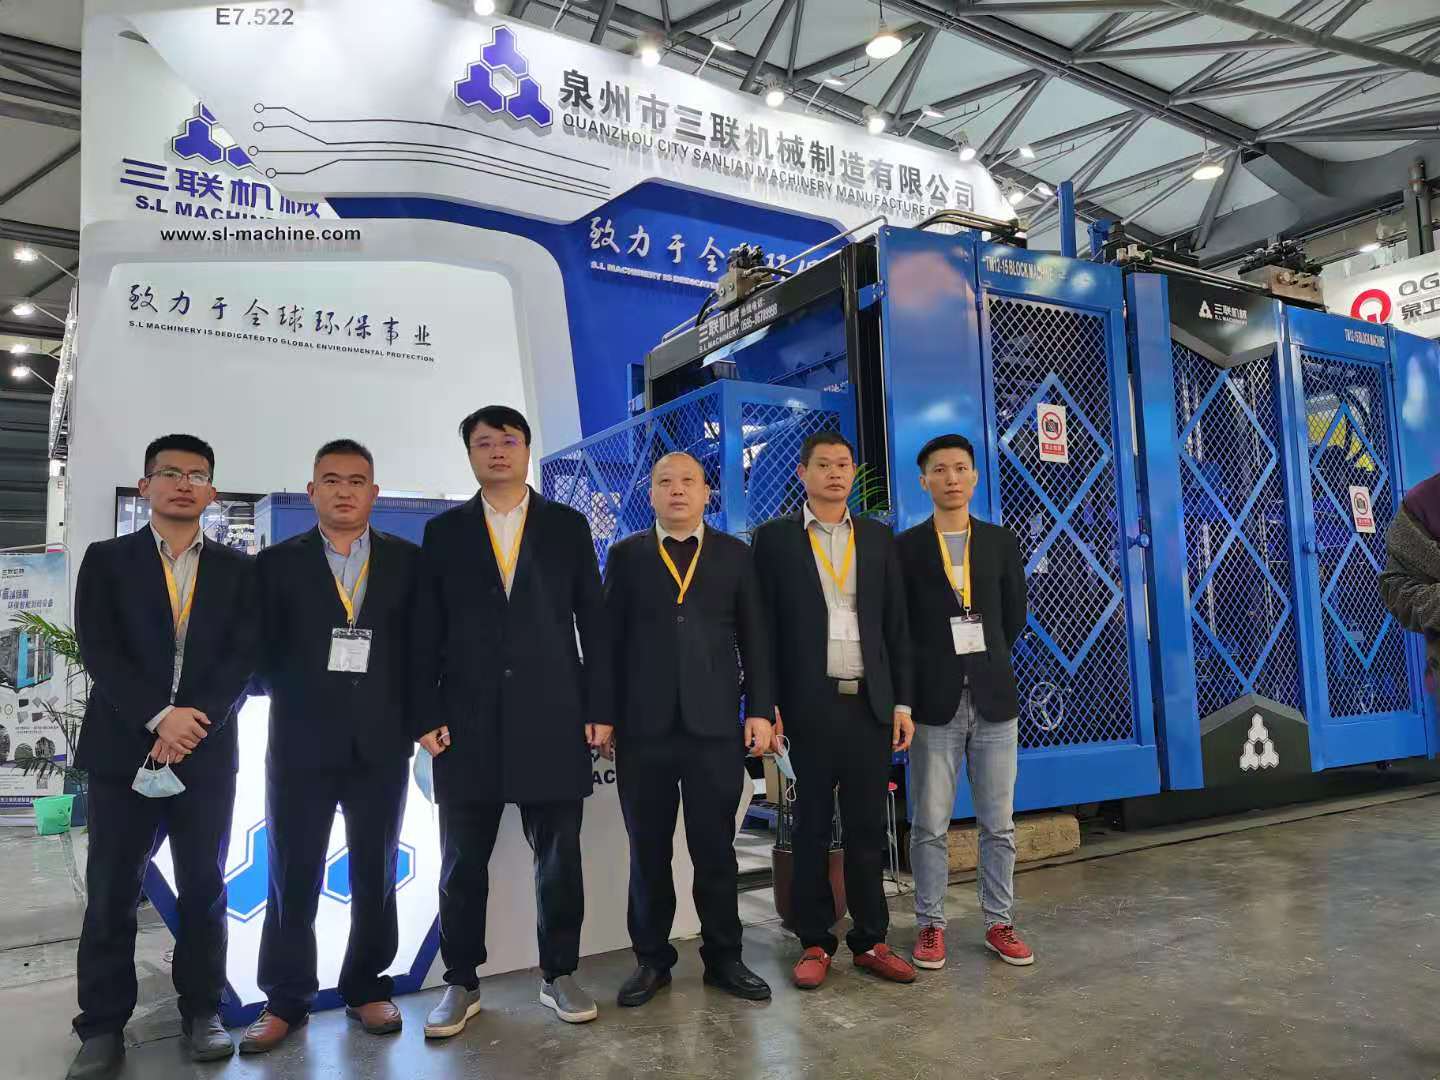 BAUMA CHINA 2020 has come to a successful conclusion, a new journey begins